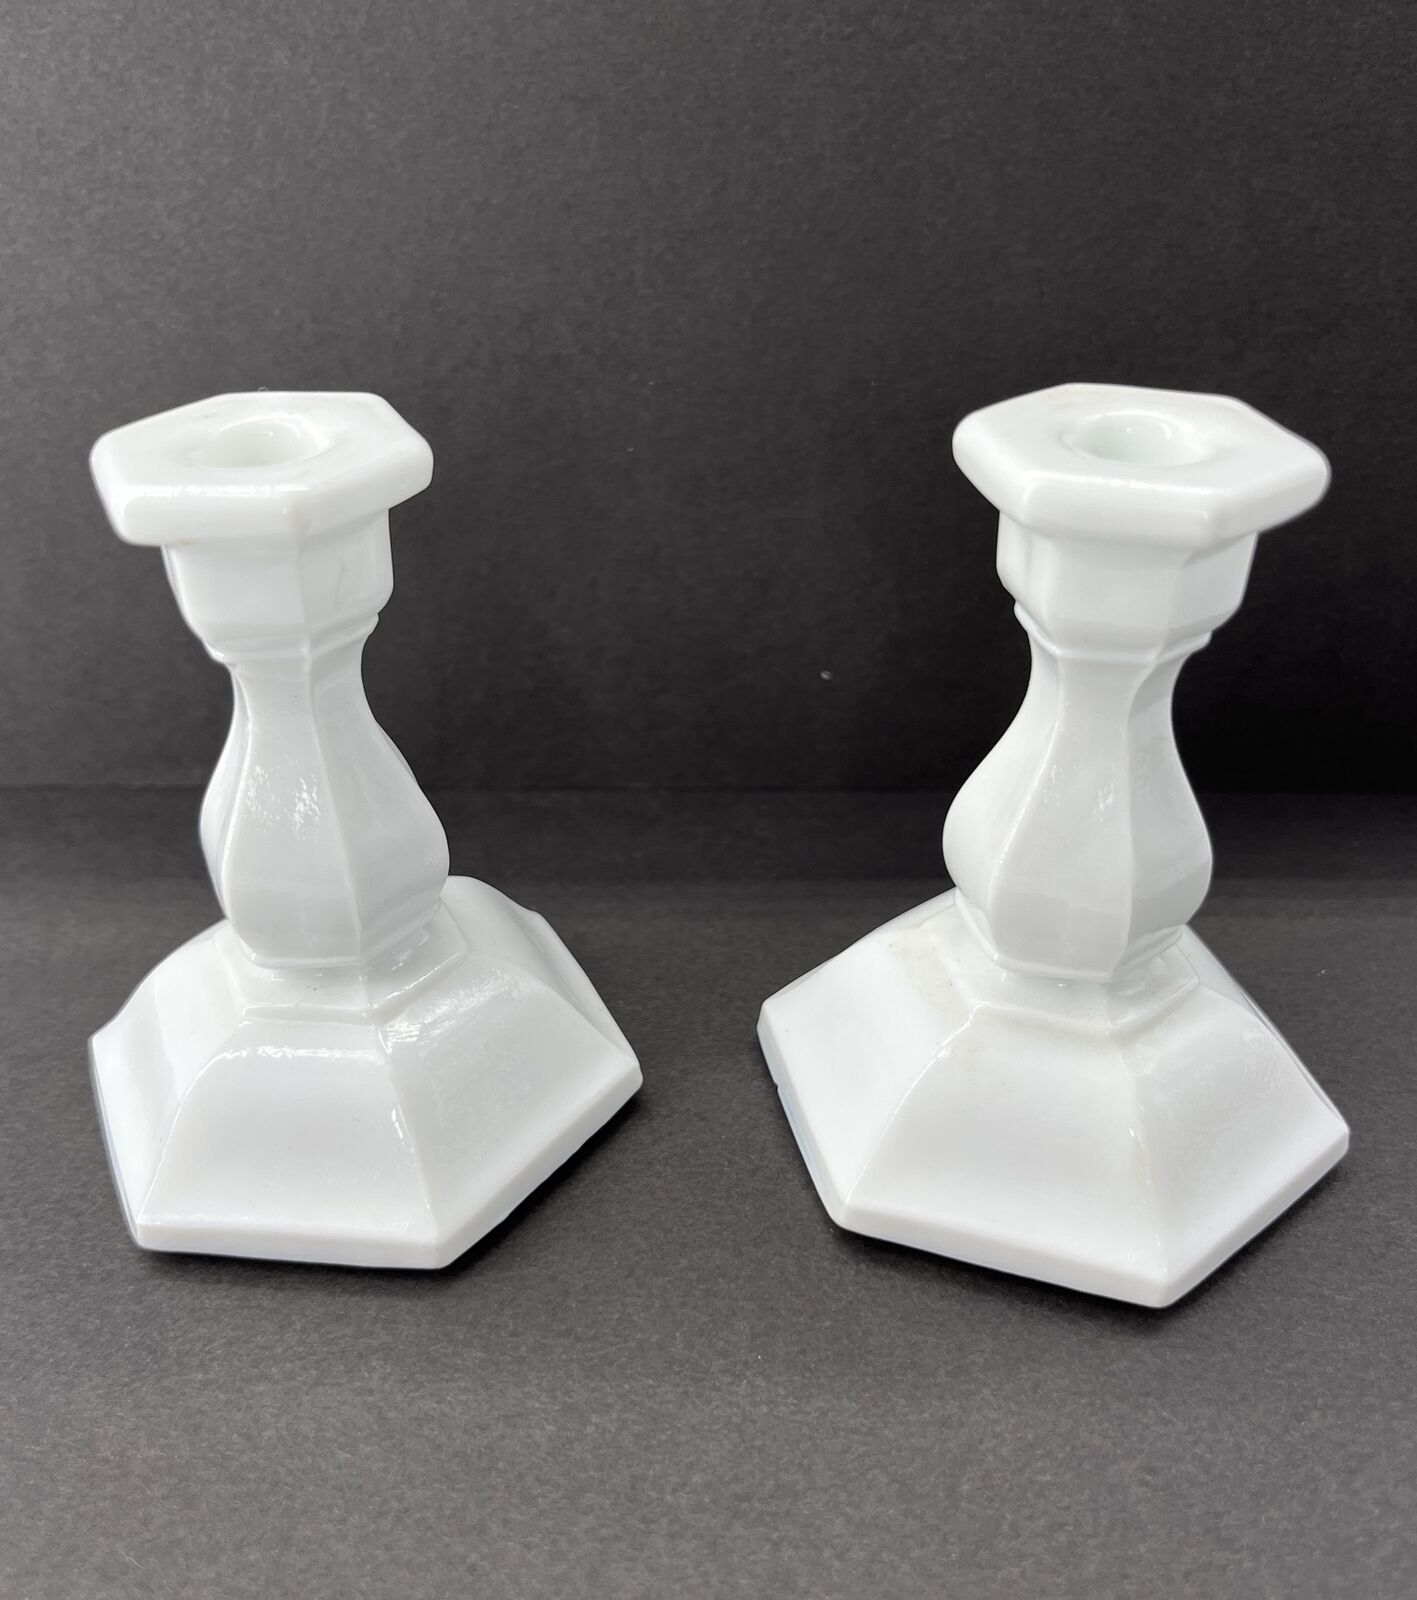 Pair of Vtg Tiara 3” Small White Milk Glass Candlestick Holders Skinny Tapers